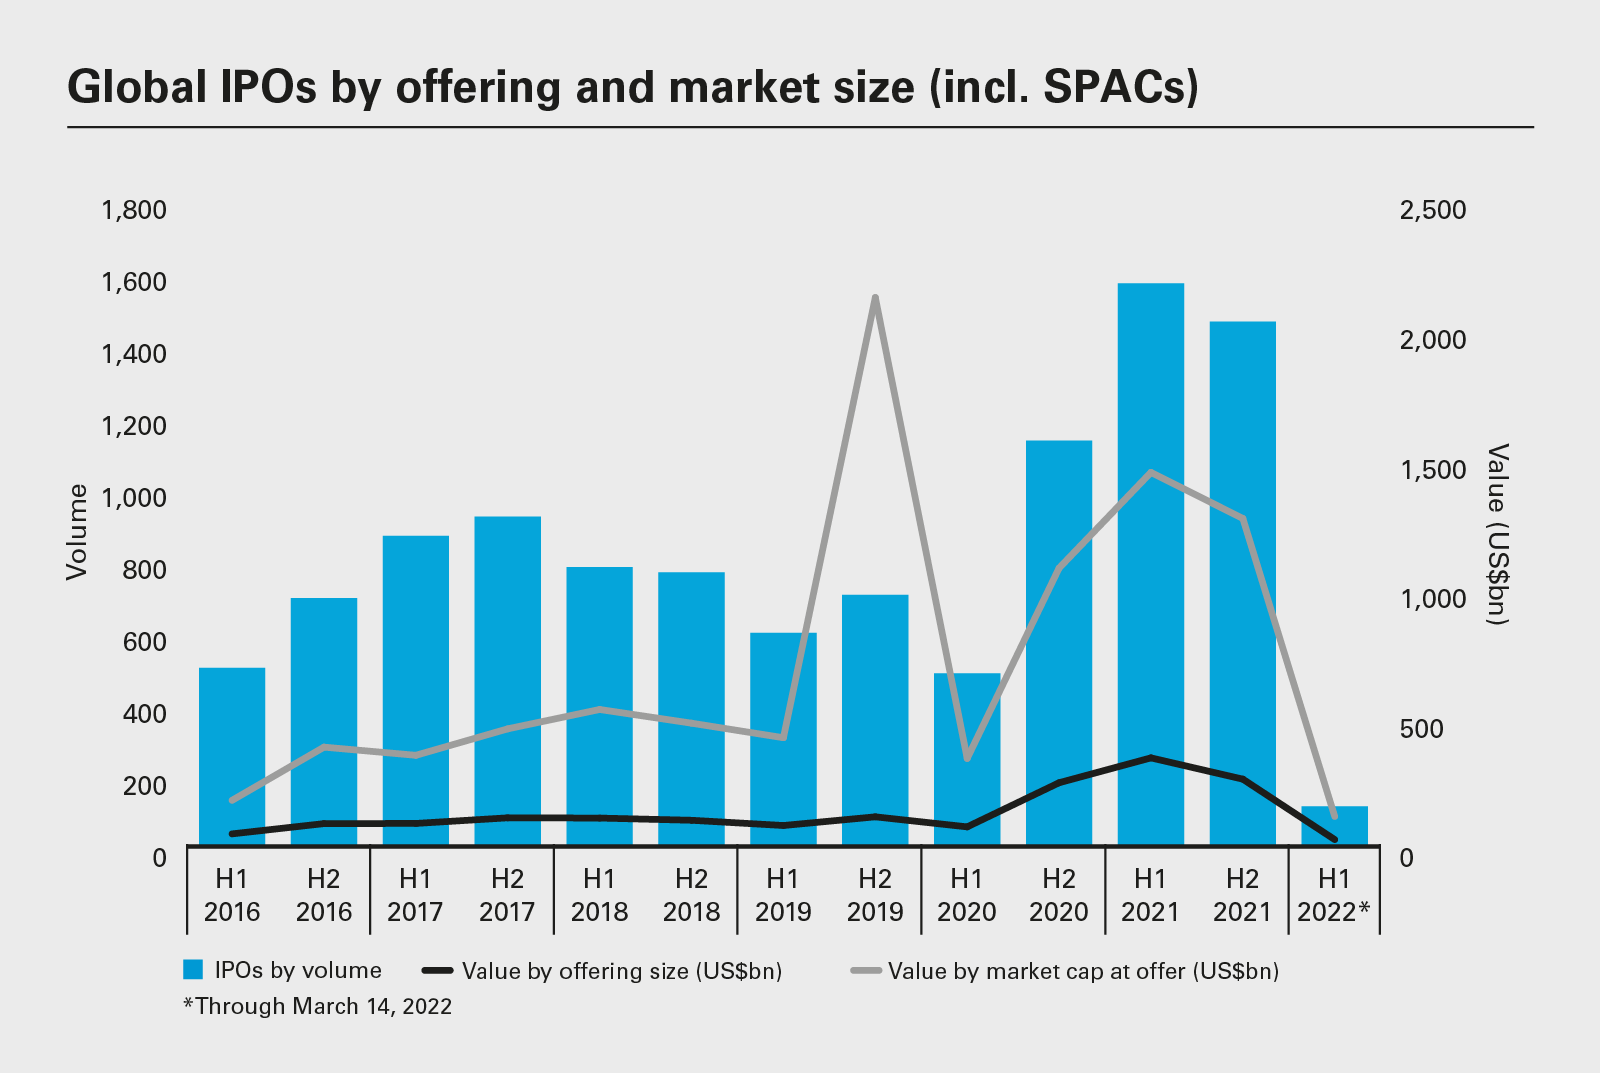 Global IPOs by offering and market size (incl. SPACs) (PDF)